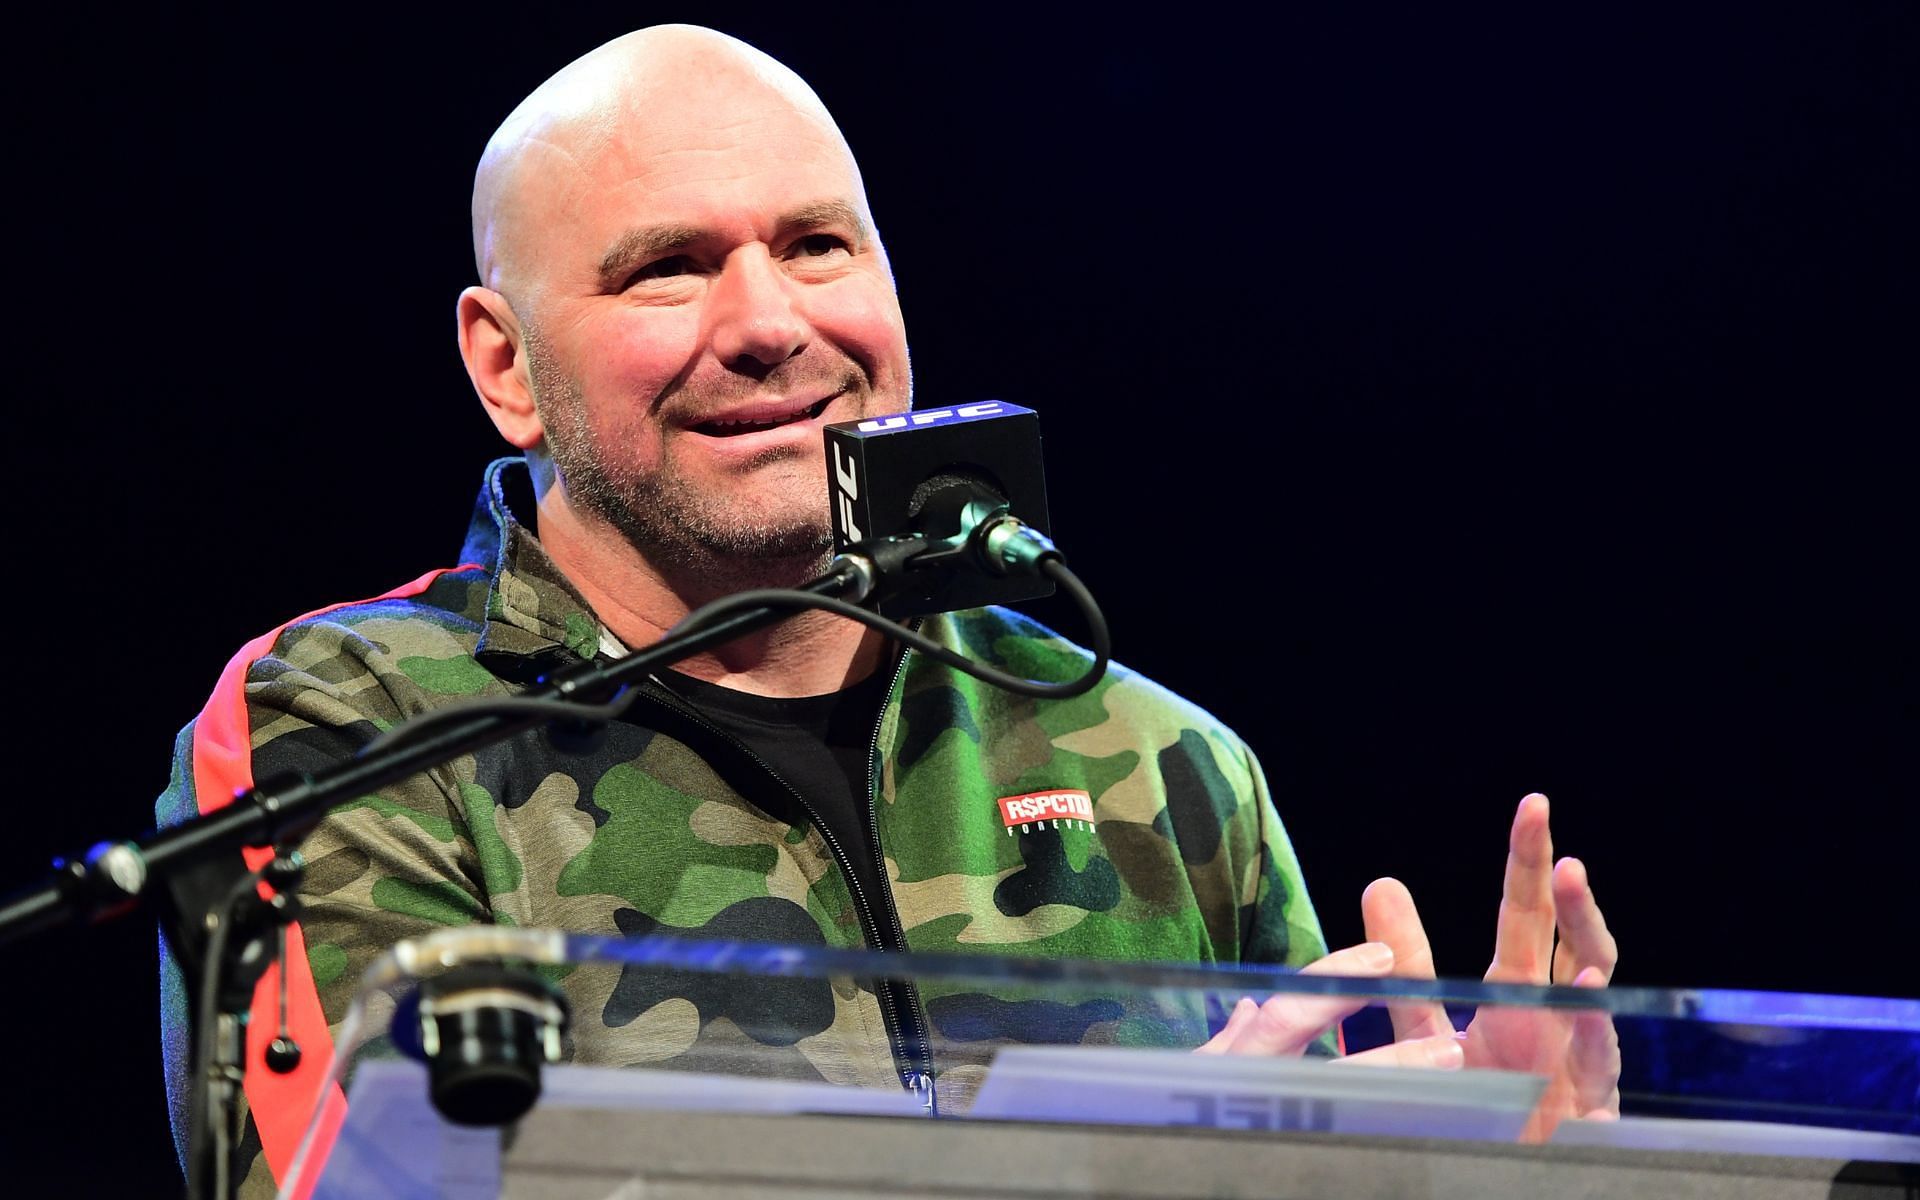 Dana White has consistently maintained that the UFC has the highest health and safety standards among organizations in the combat sports realm [Image courtesy: Getty Images]